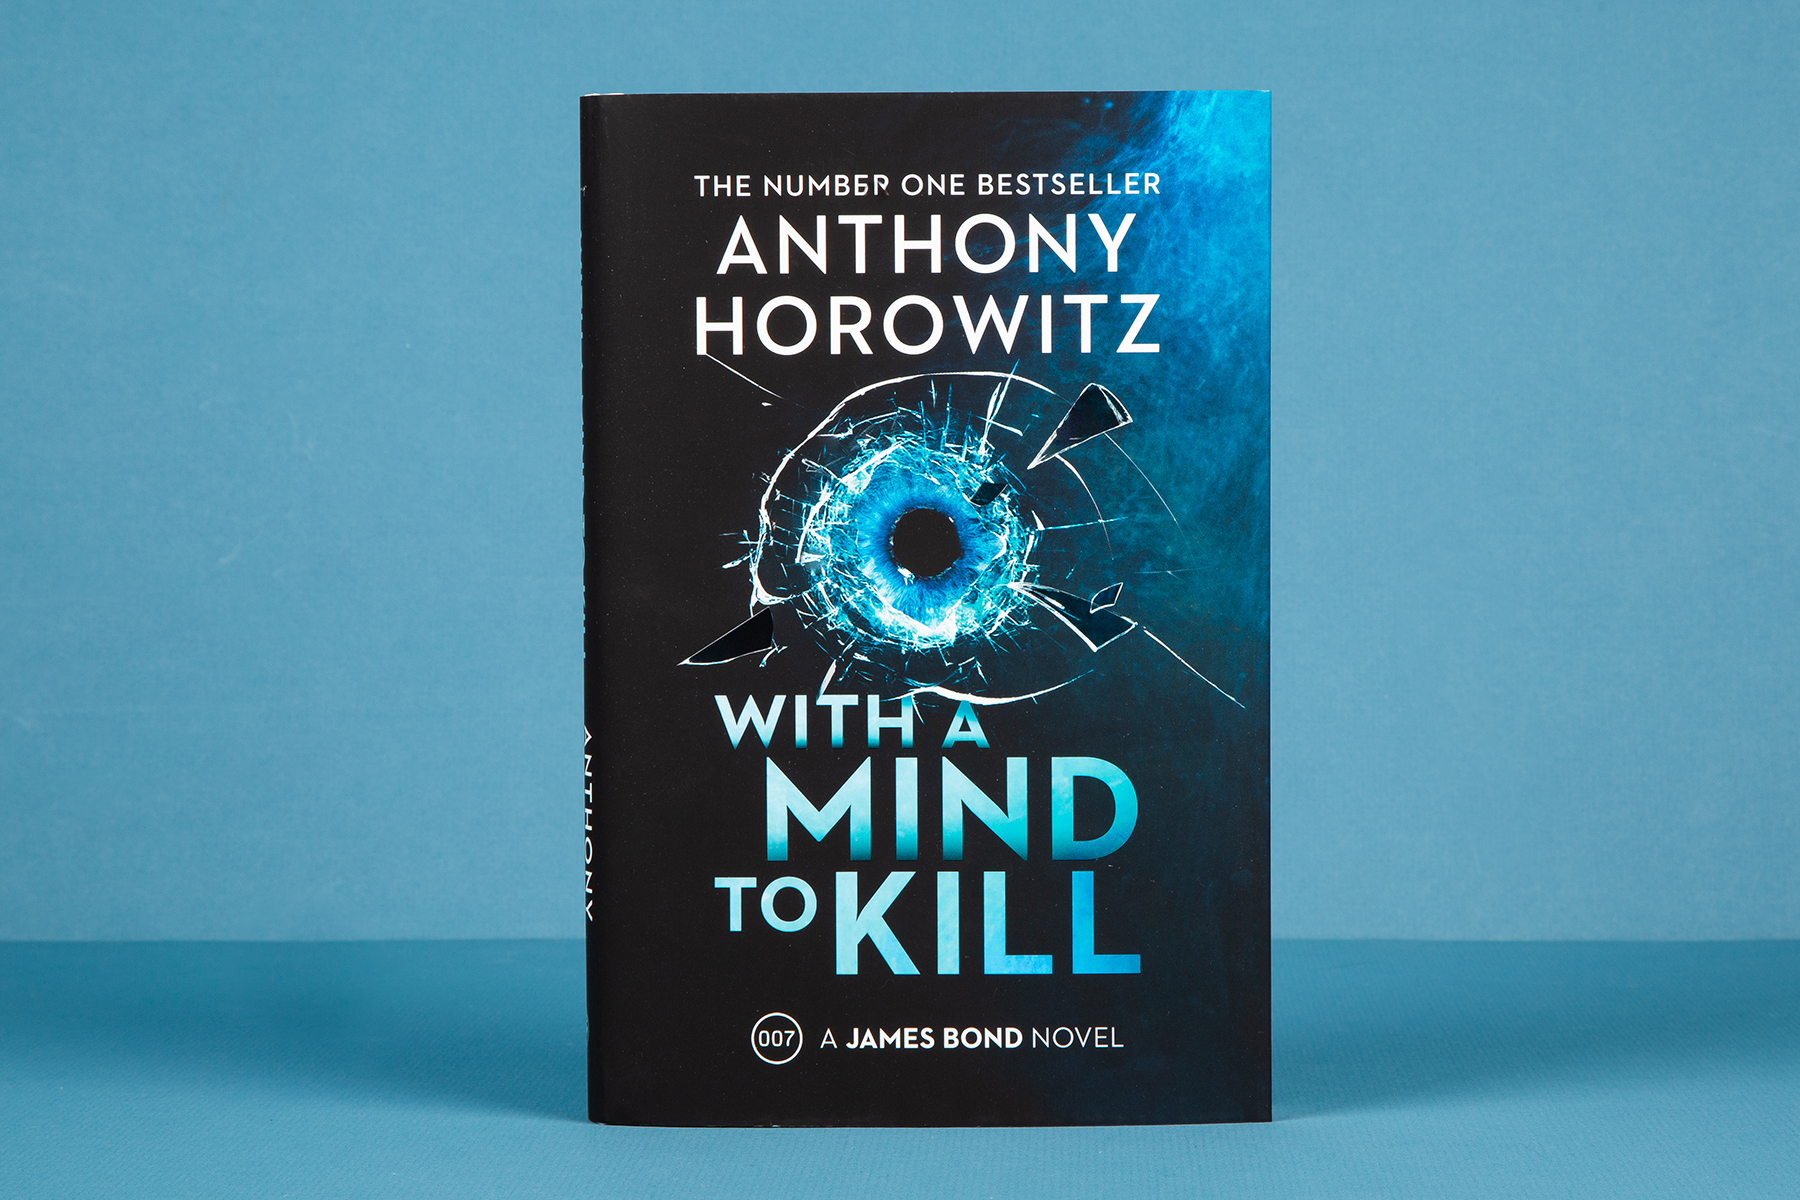 A photo of Anthony Horowitz's novel With a Mind to Kill against a blue background.